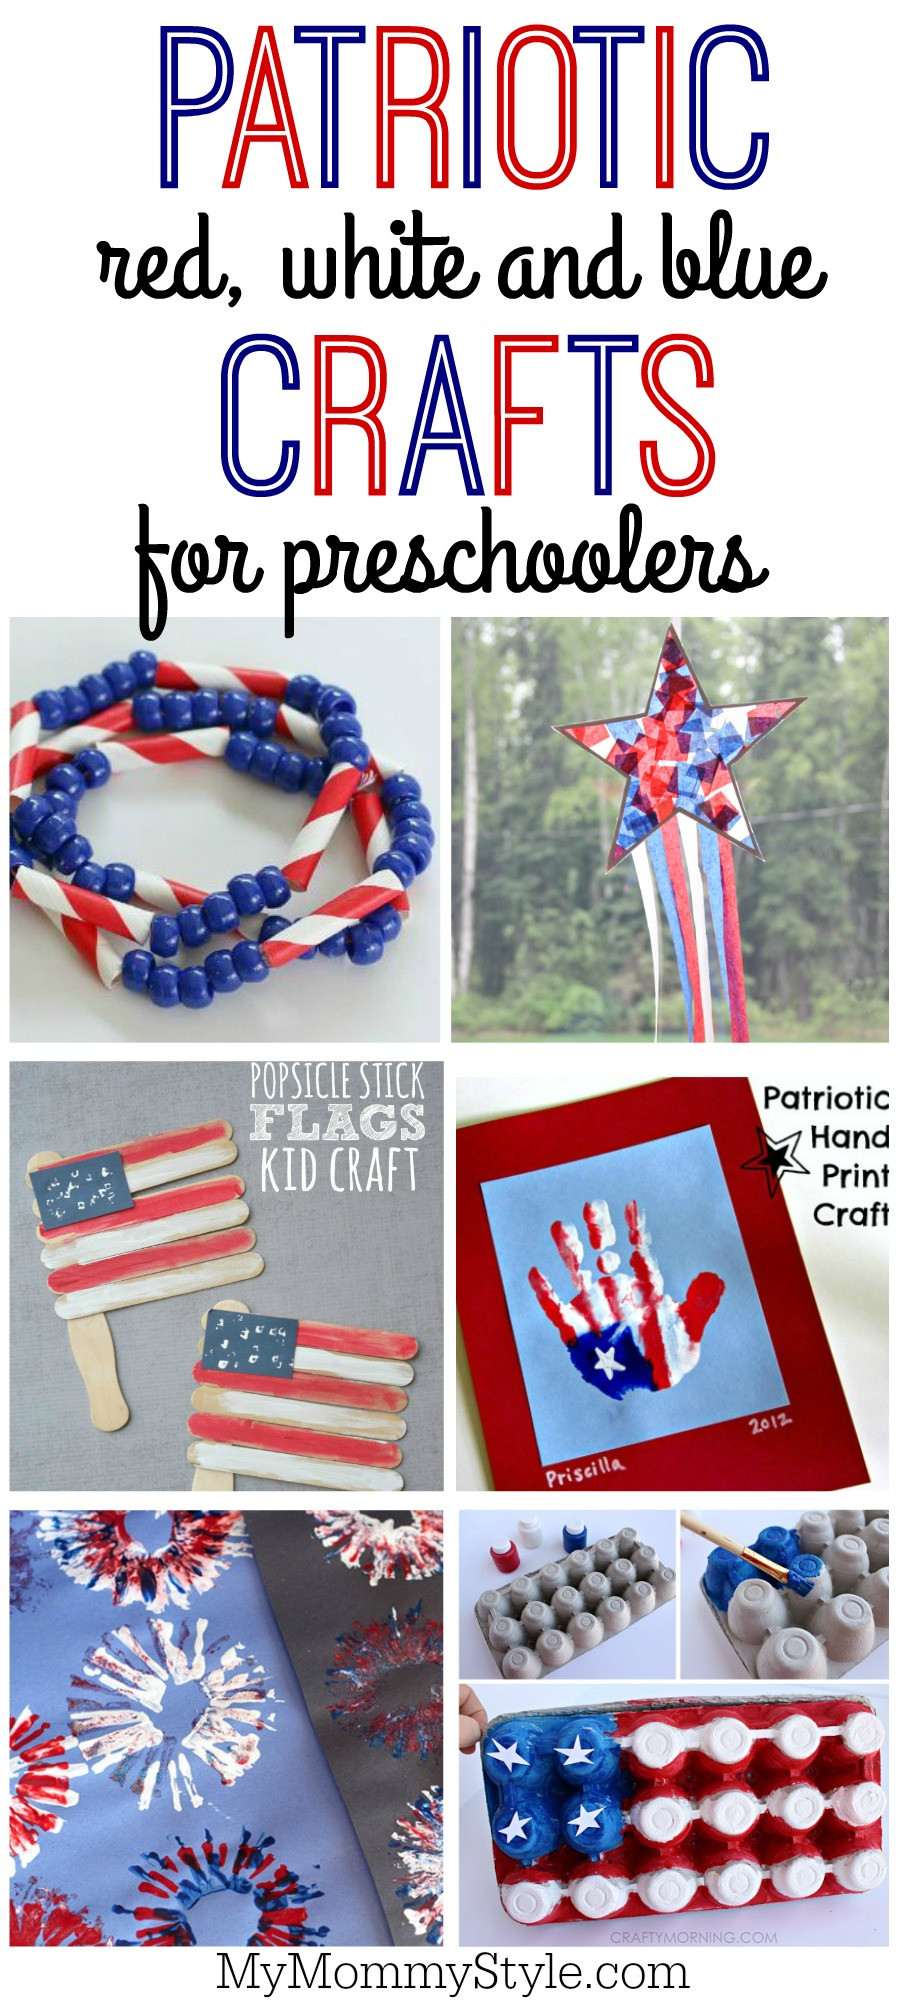 Memorial Day Crafts For Kids
 25 Patriotic crafts for kids My Mommy Style